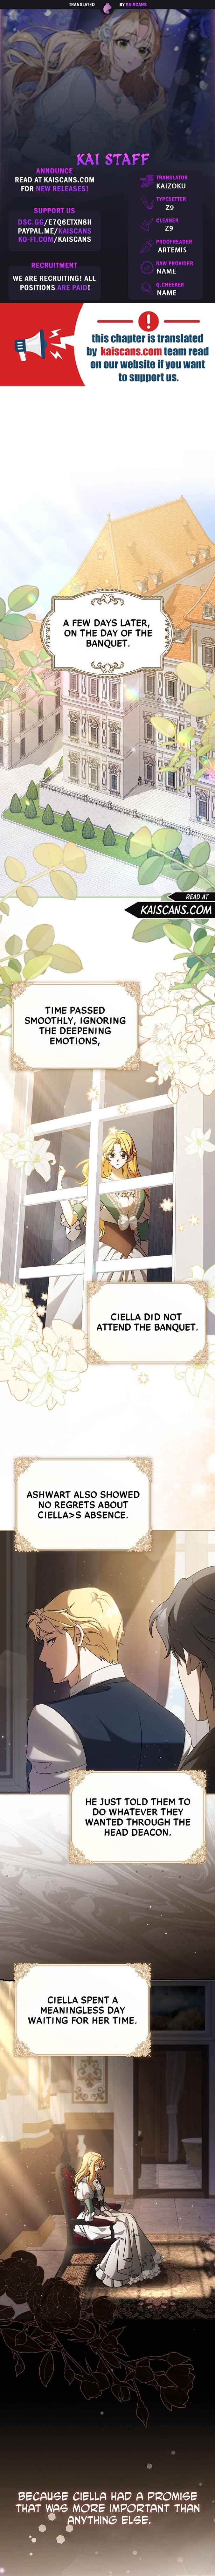 The Lost Cinderella chapter 5